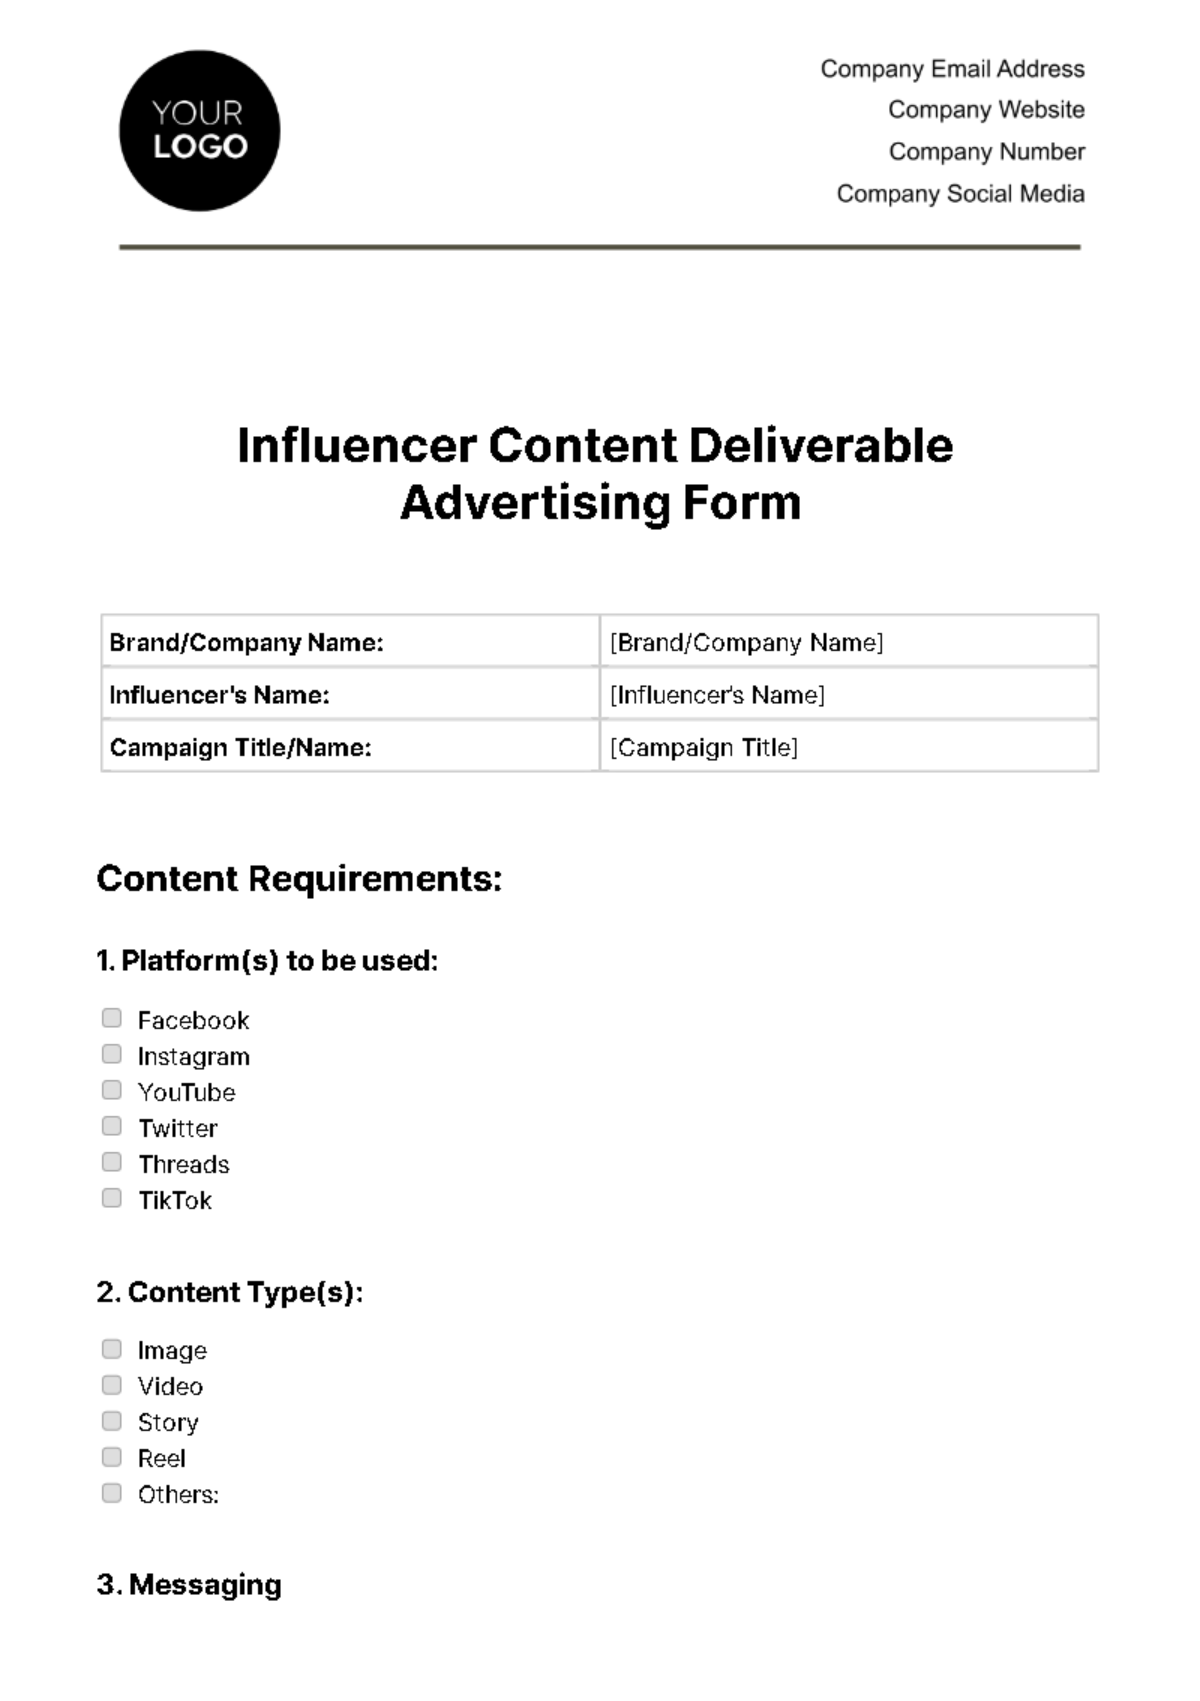 Free Influencer Content Deliverable Advertising Form Template